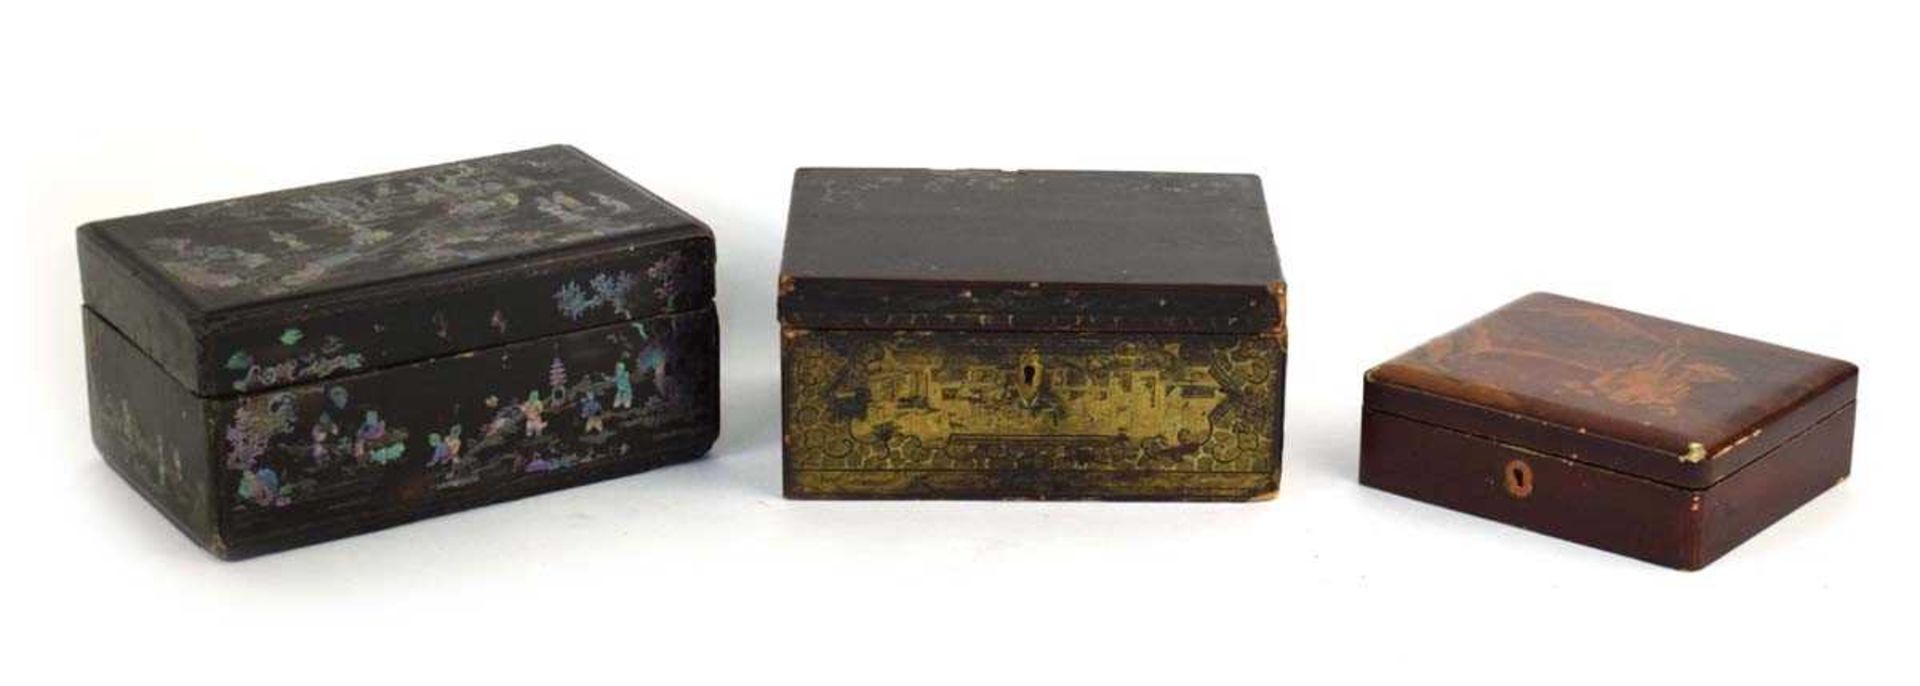 A Chinese Export lacquer work and pewter mounted caddy of rectangular form, w. 23 cm, d. 16.5 cm, h.